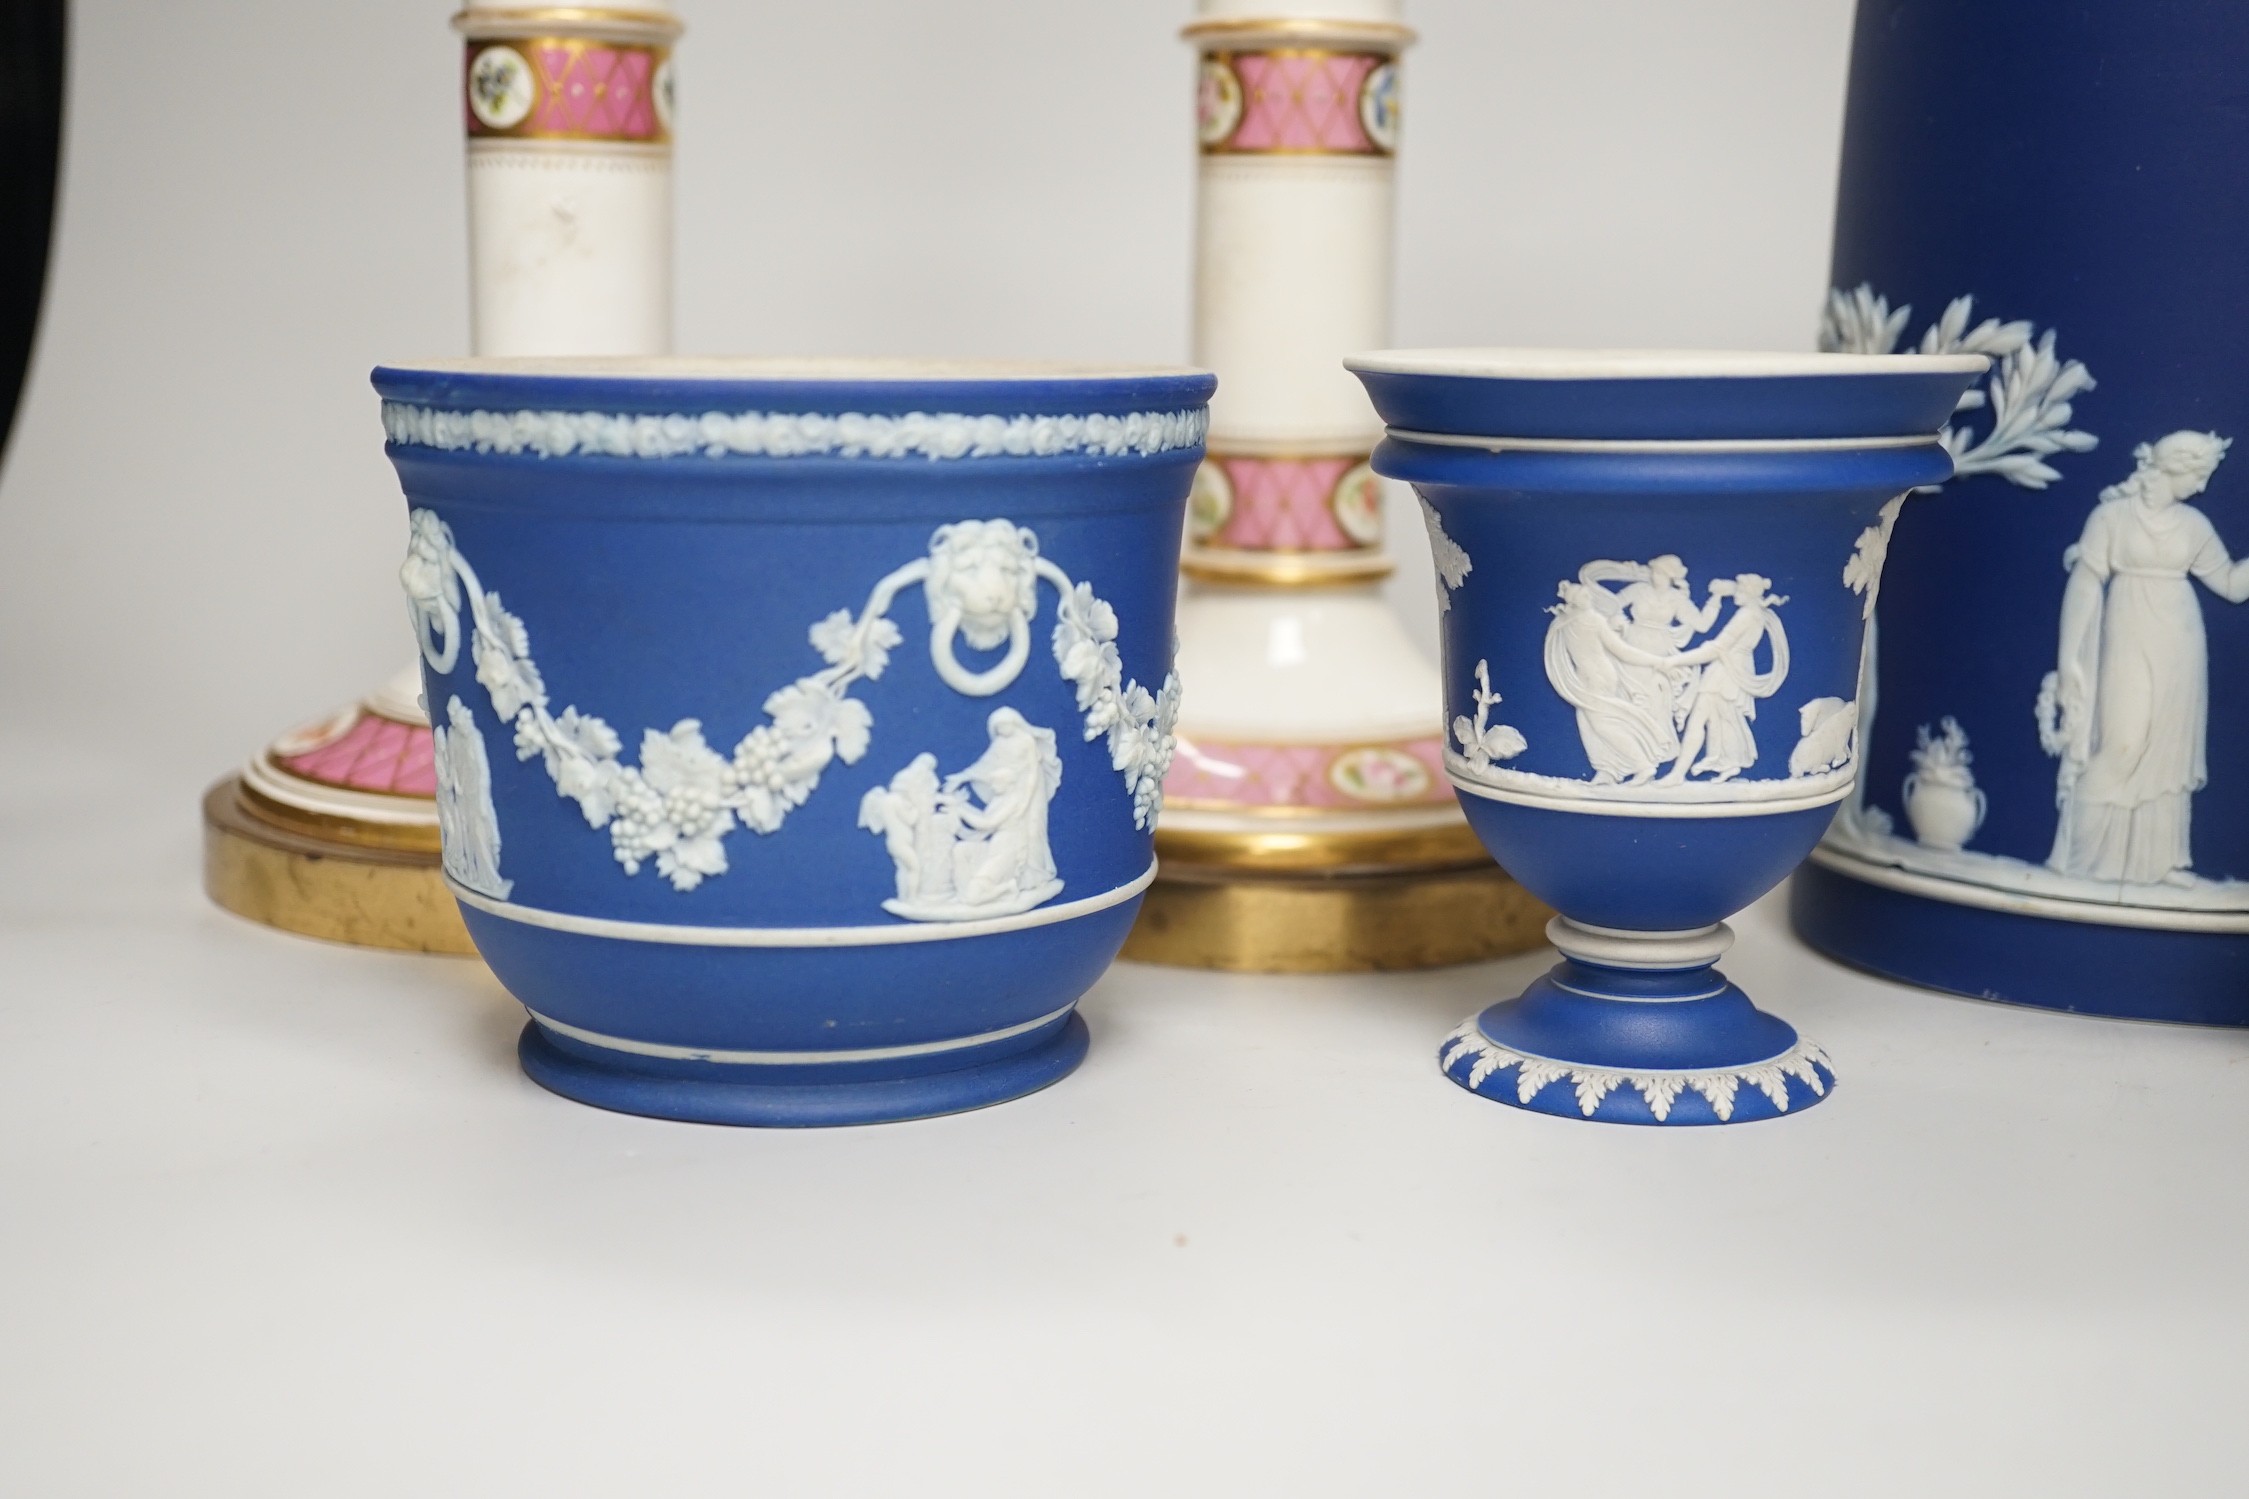 Three mid to late 19th century pieces of Wedgwood Jasperware, including a coffee pot and a small cache-pot, a pair of 19th century porcelain candlesticks converted into lamps